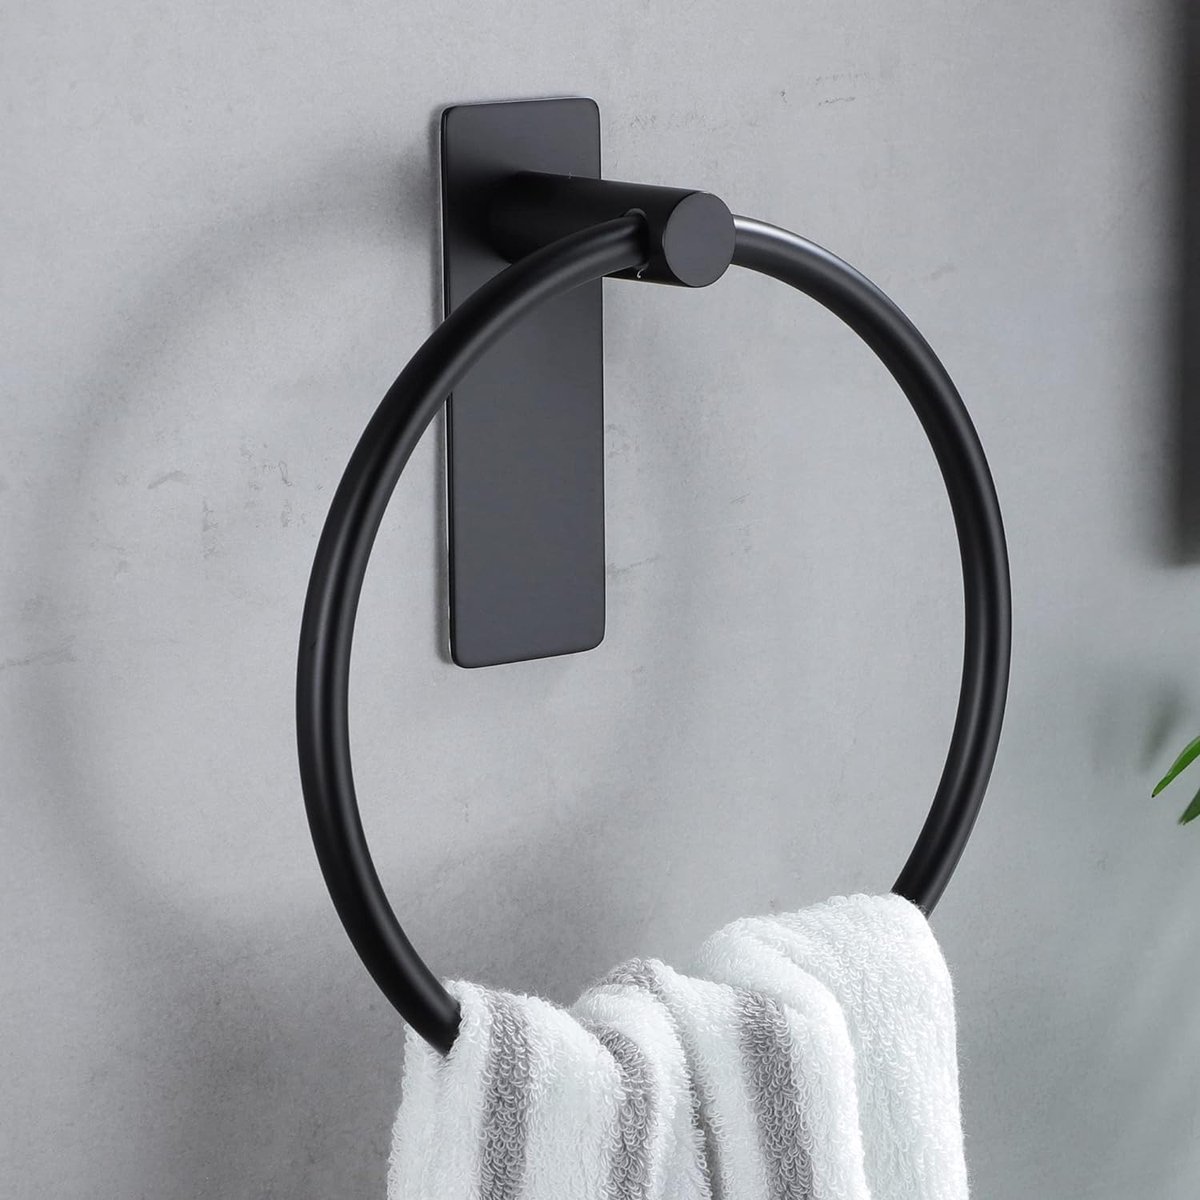 Towel Ring Black Towel Holder Ring No Drilling Towel Rail for Kitchen and Bathroom Self-Adhesive Stainless Steel